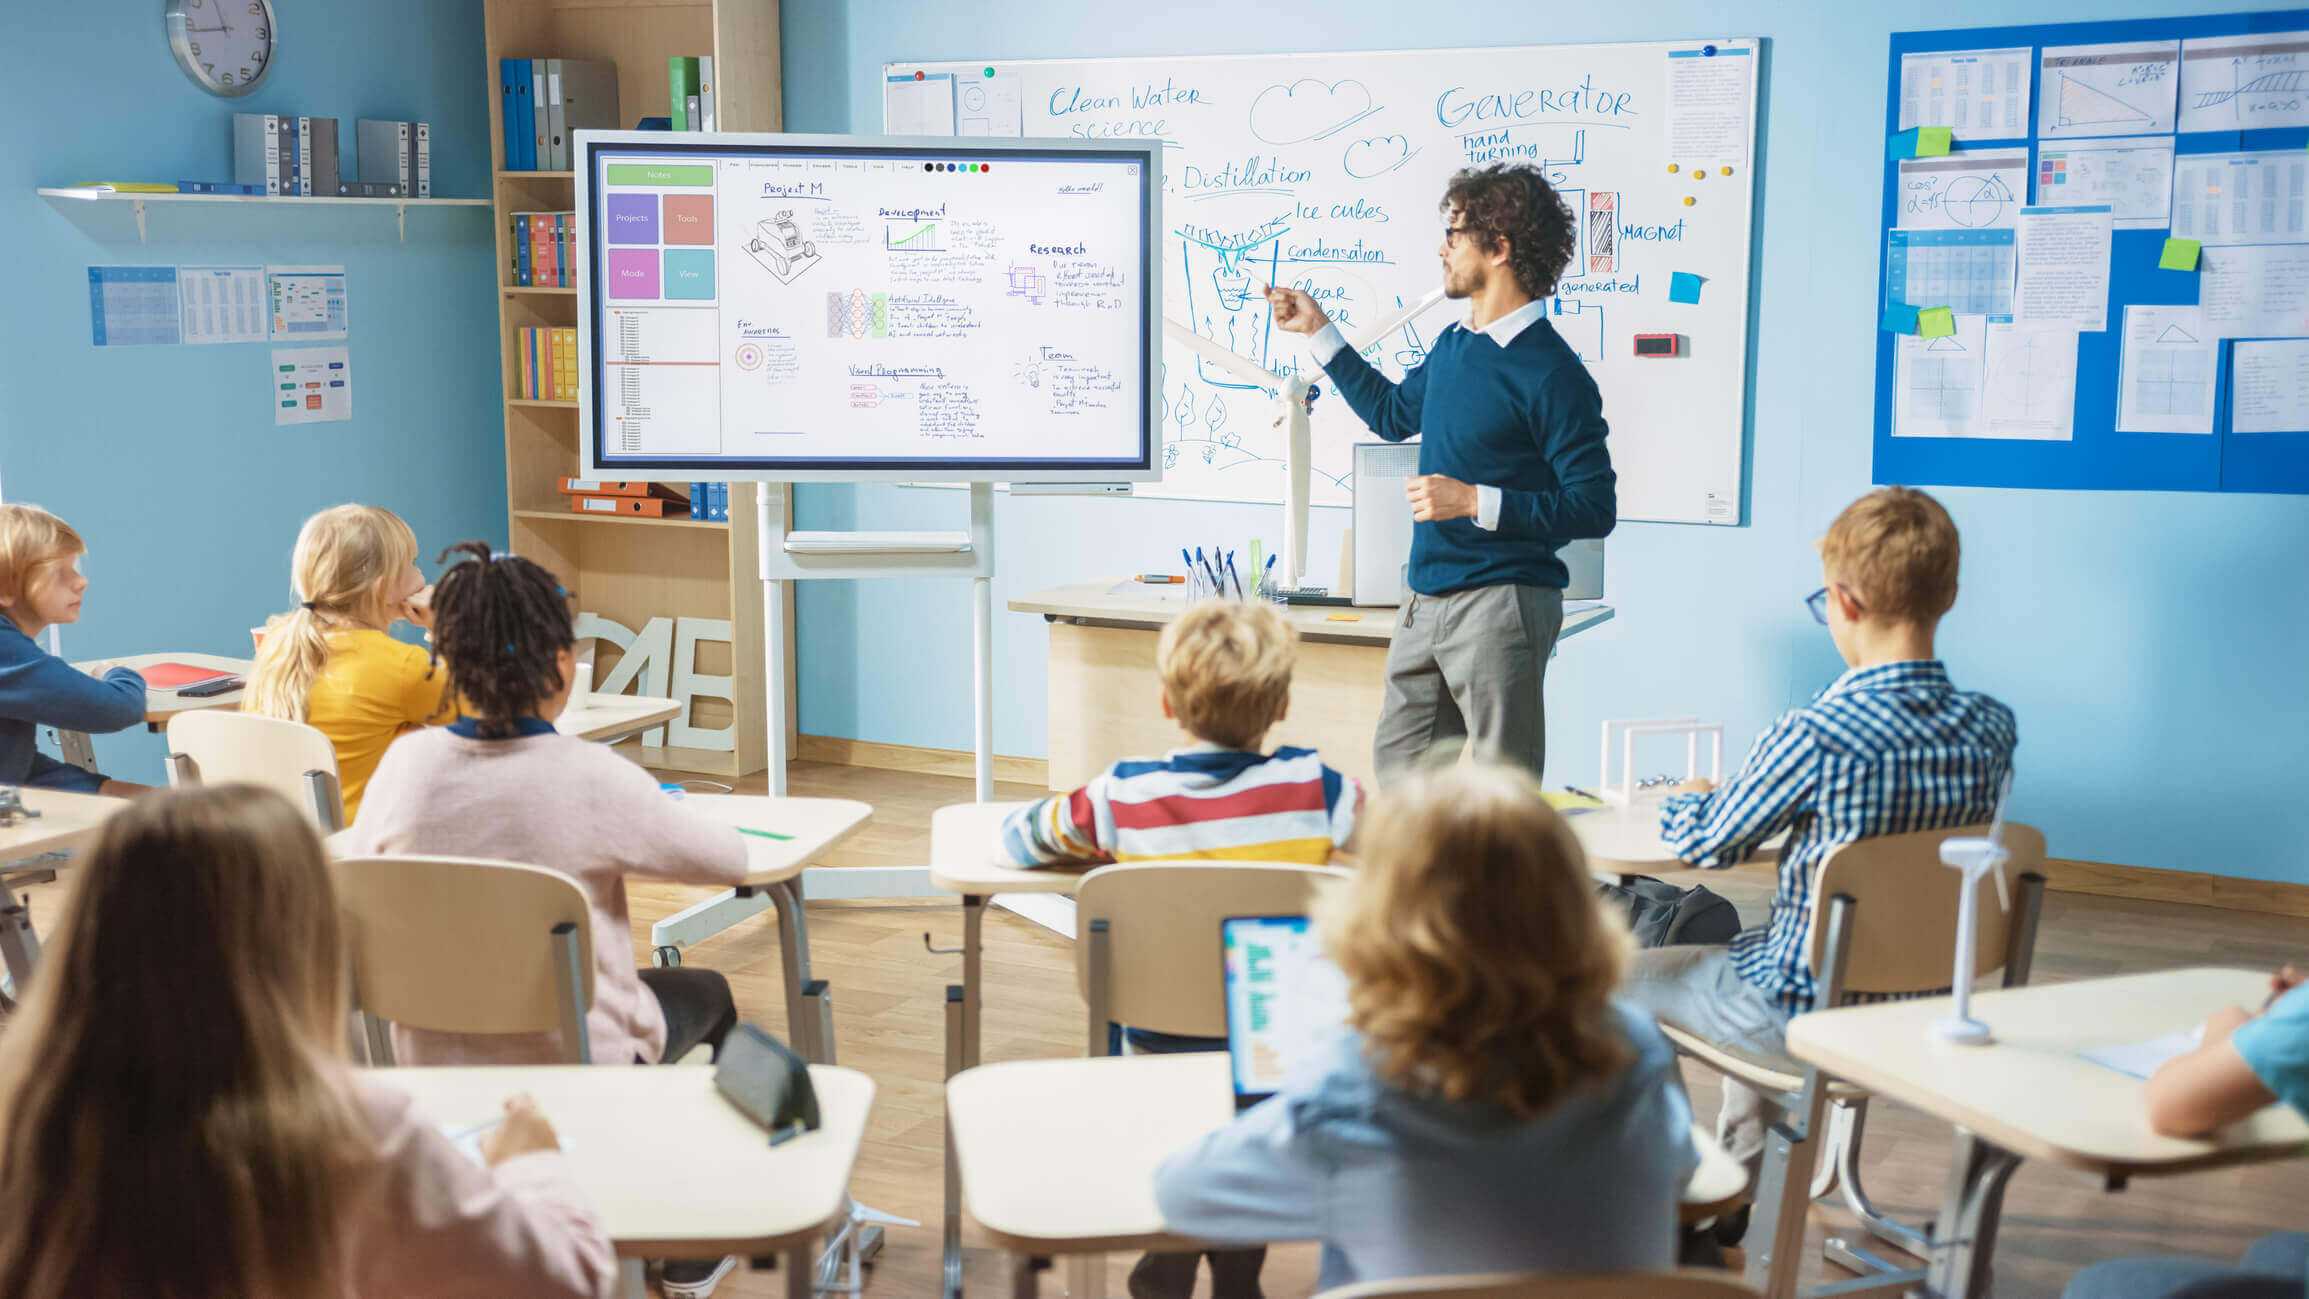 Teacher uses interactive whiteboard to engage students in lesson